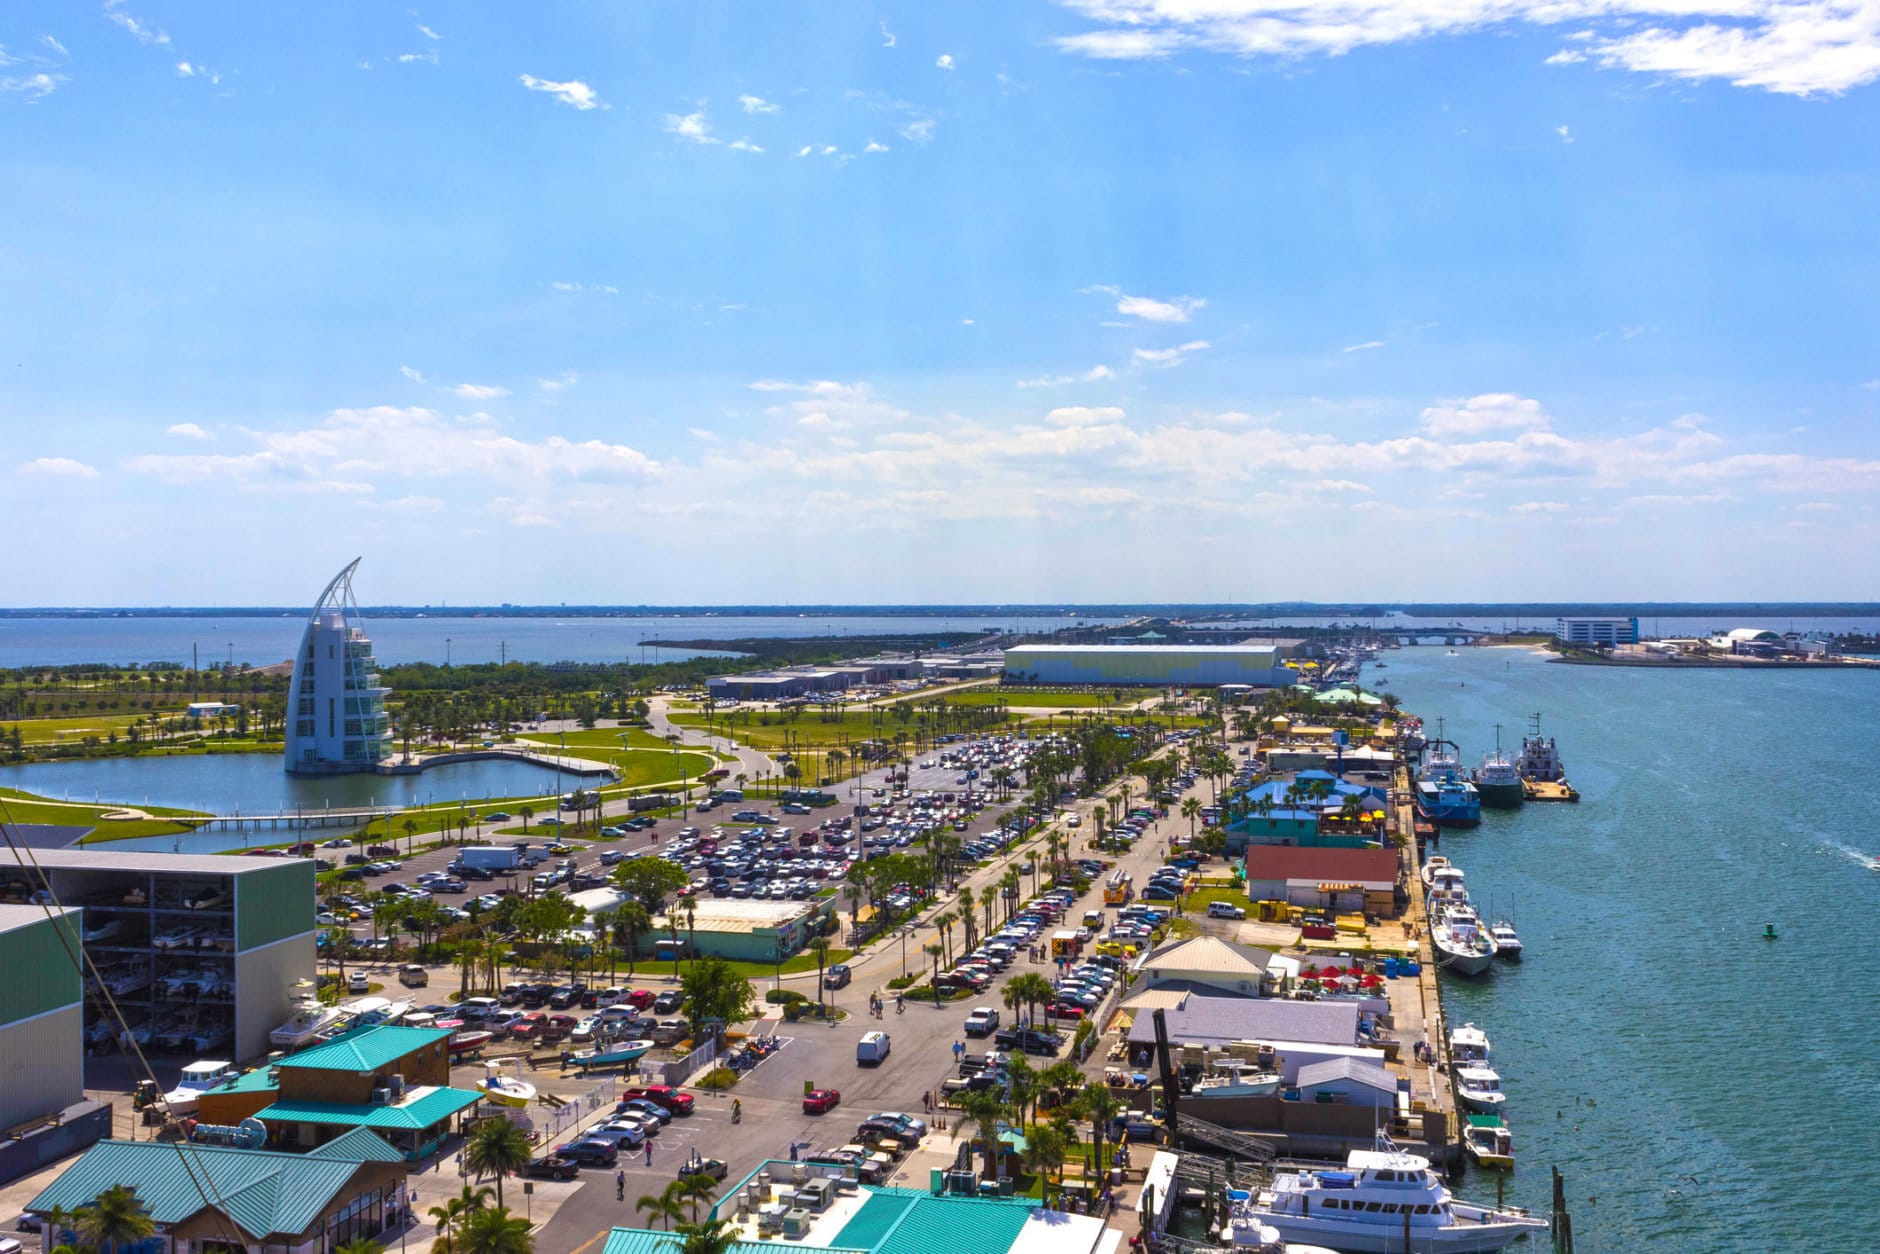 Cape Canaveral, USA. The arial view of port Canaveral from cruise ship, docked in Port Canaveral, Brevard County, Florida. (Getty Images/iStockphoto/Marina113)